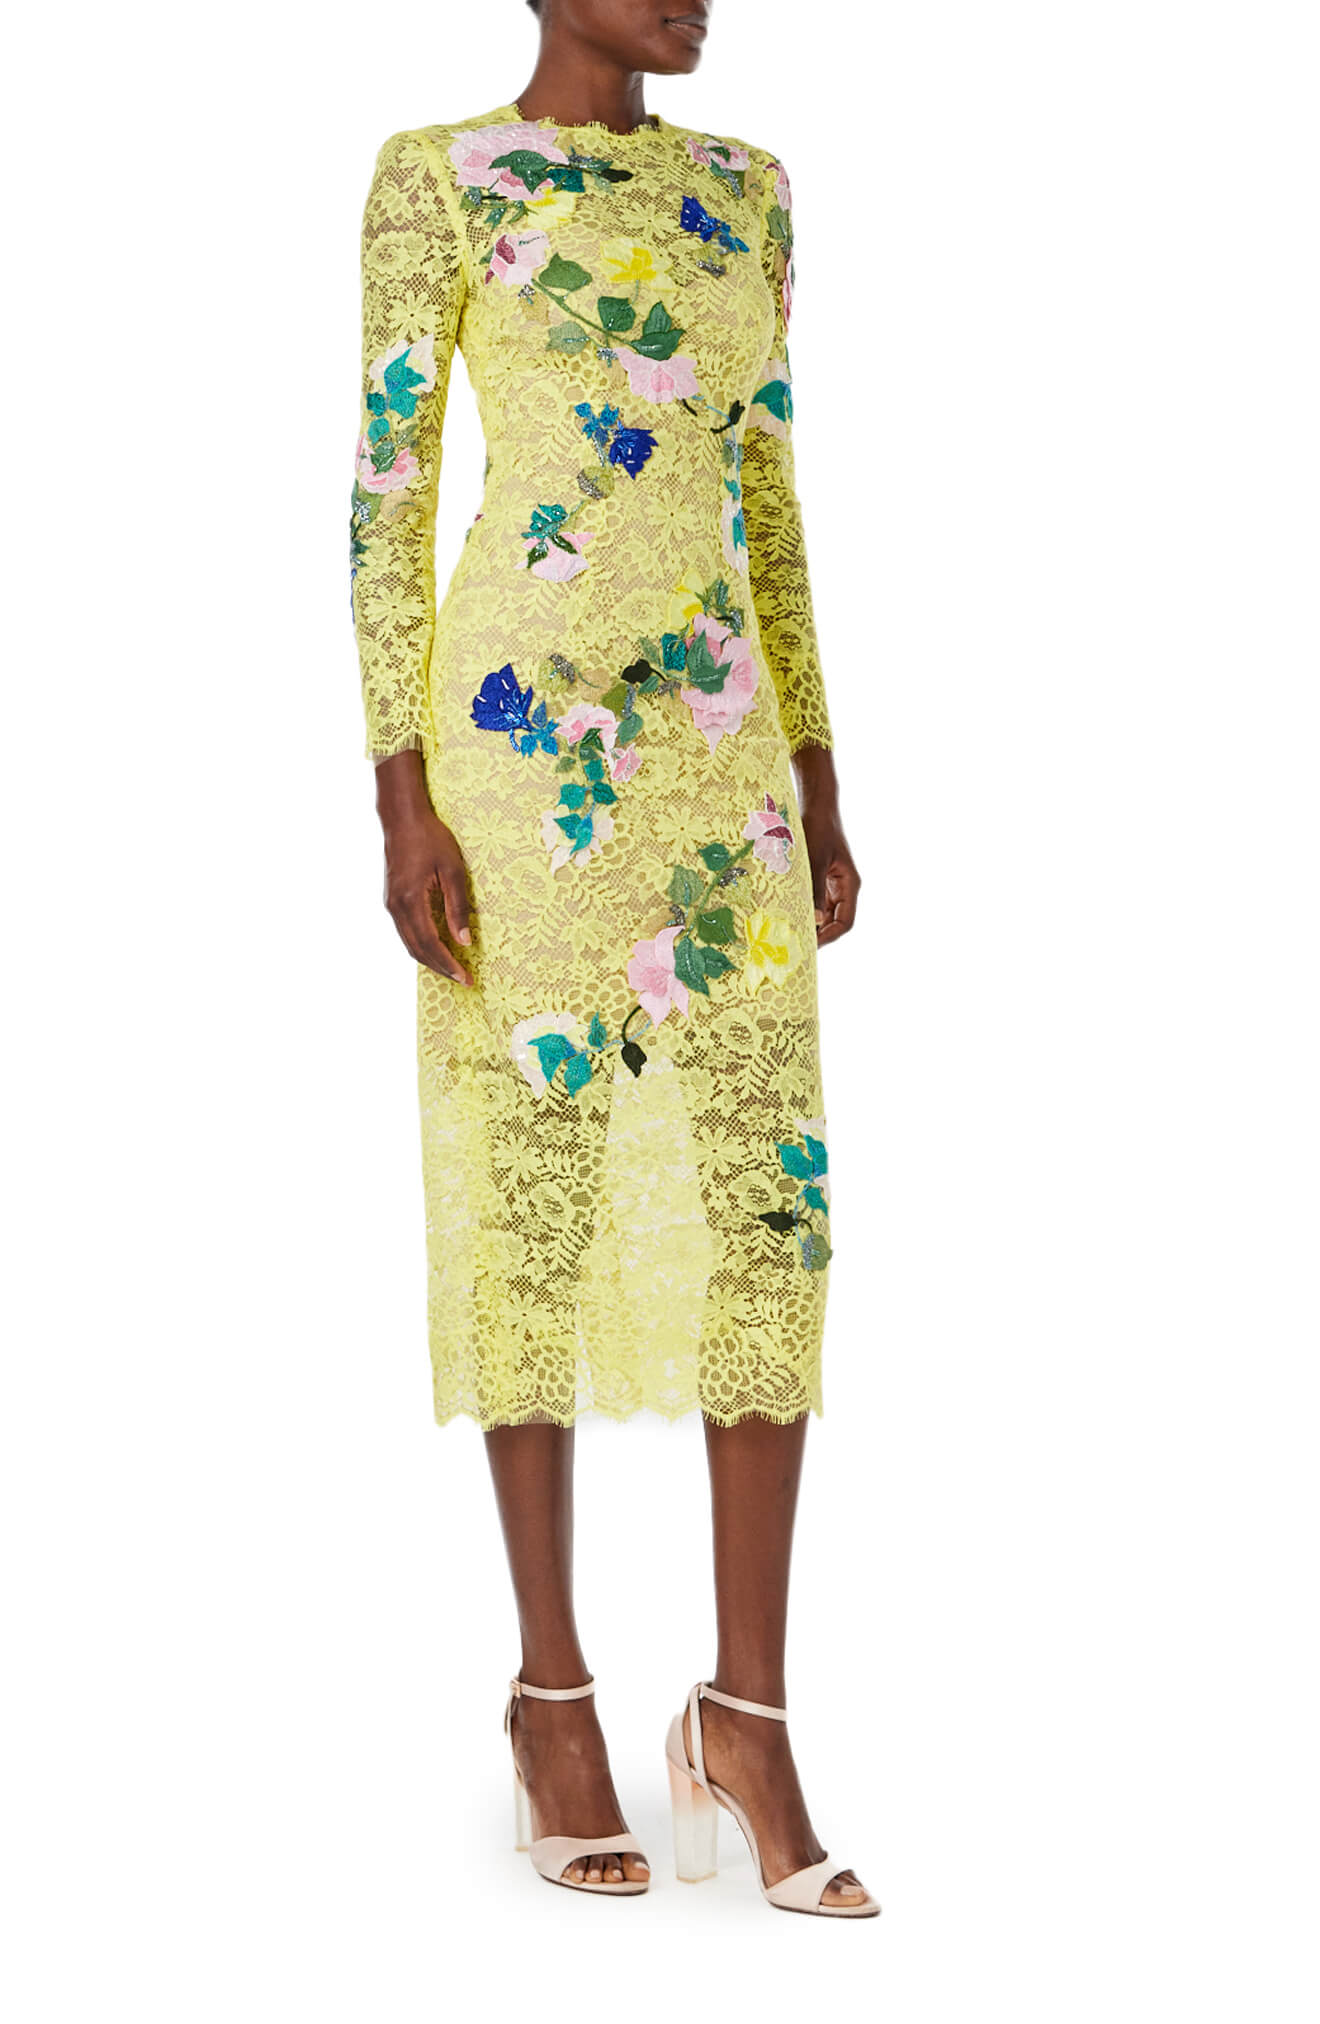 Monique Lhuillier Spring 2024 long sleeve yellow lace midi dress with floral embroidery - side one.